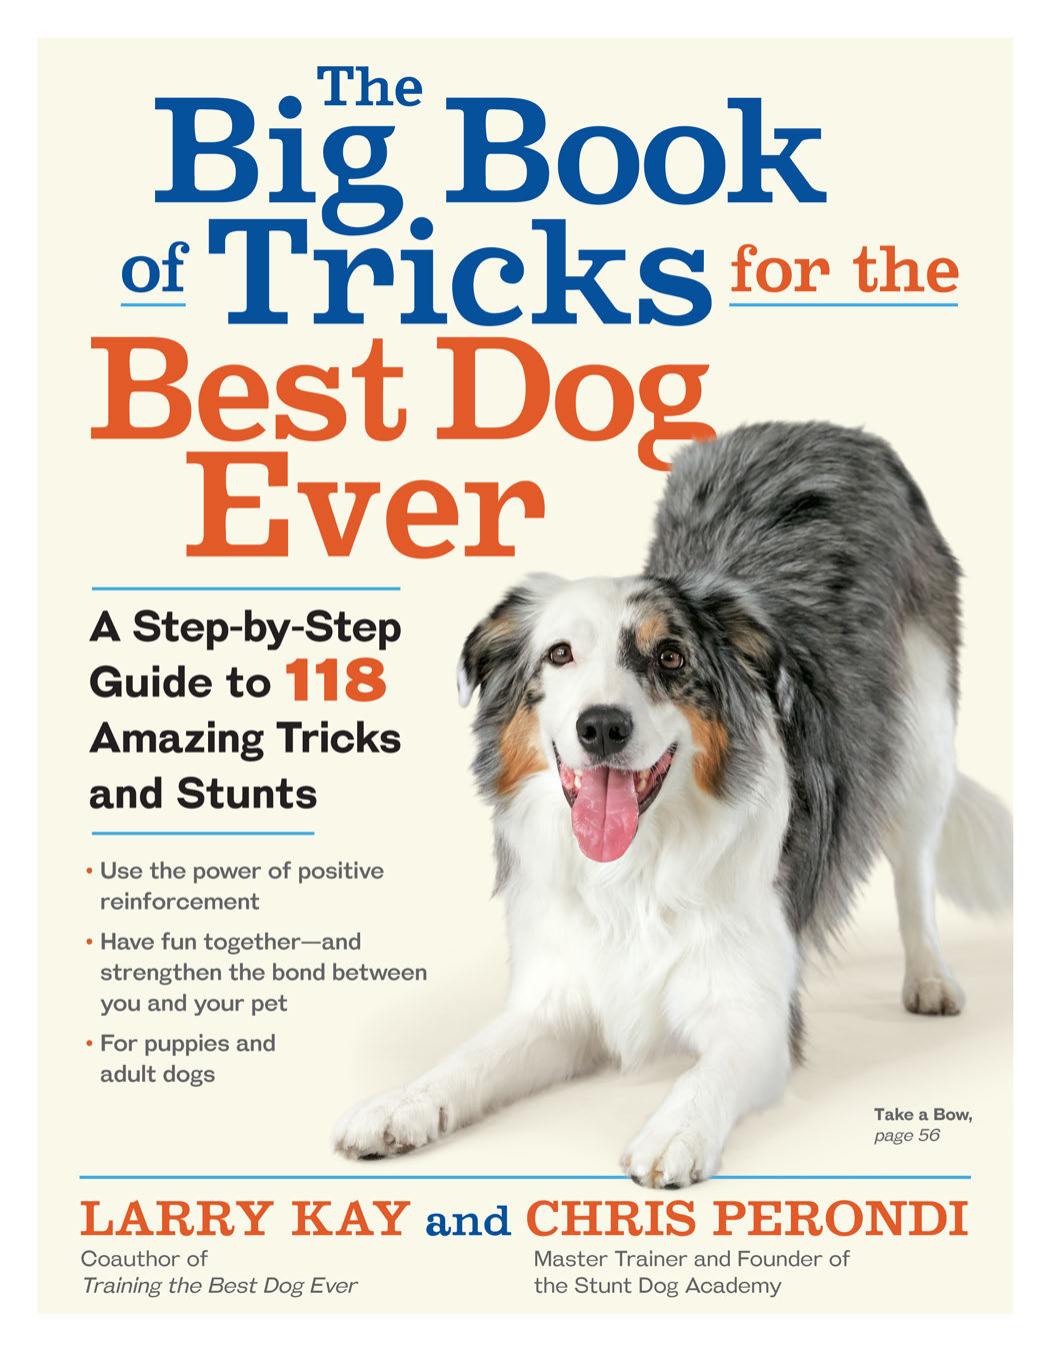 The Big Book of Tricks for the Best Dog Ever by Larry Kay